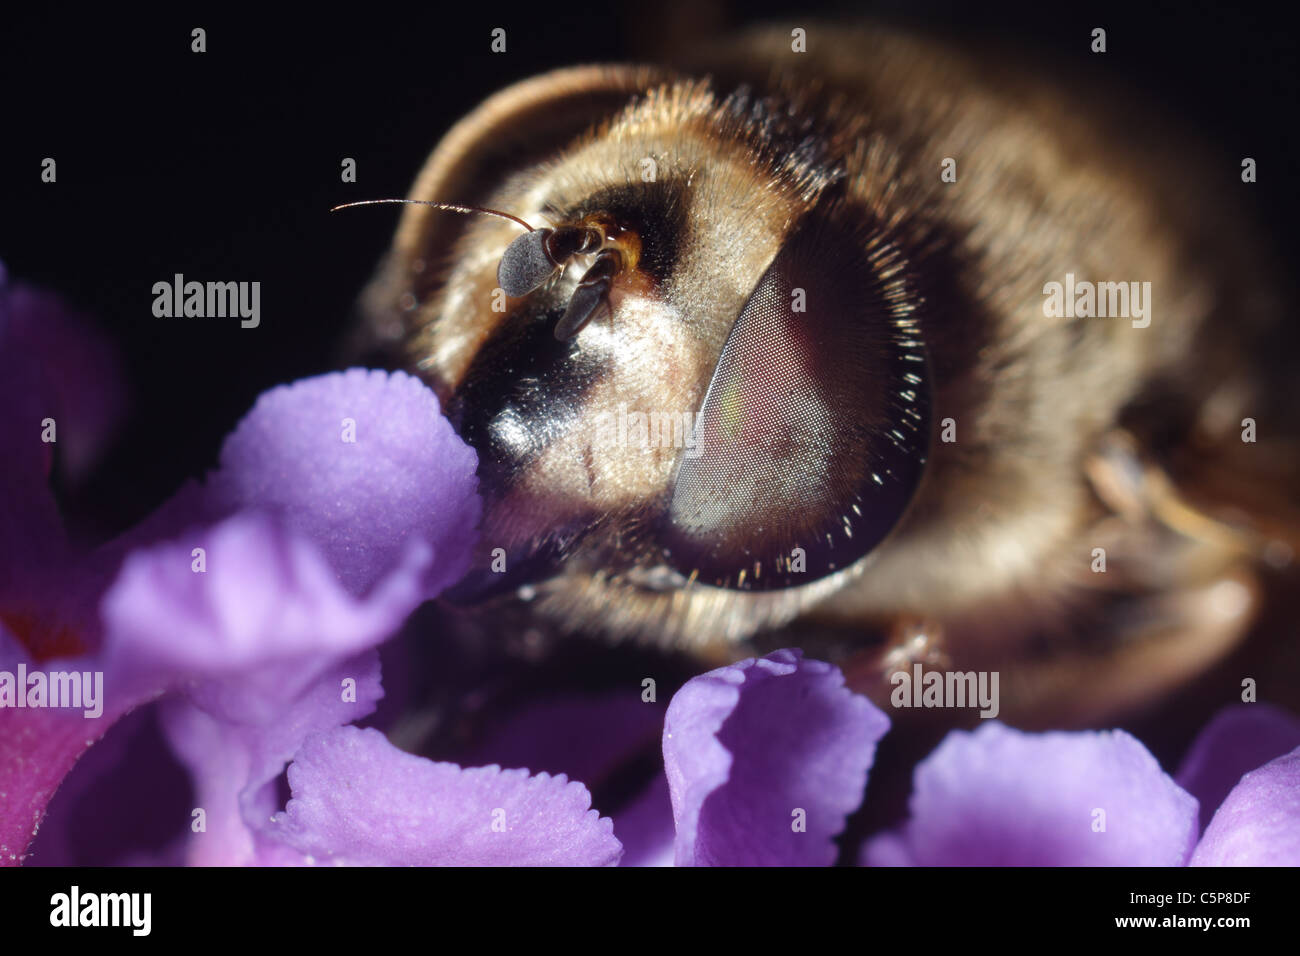 A close-up photo of a syrphid fly on a purple flower. Stock Photo